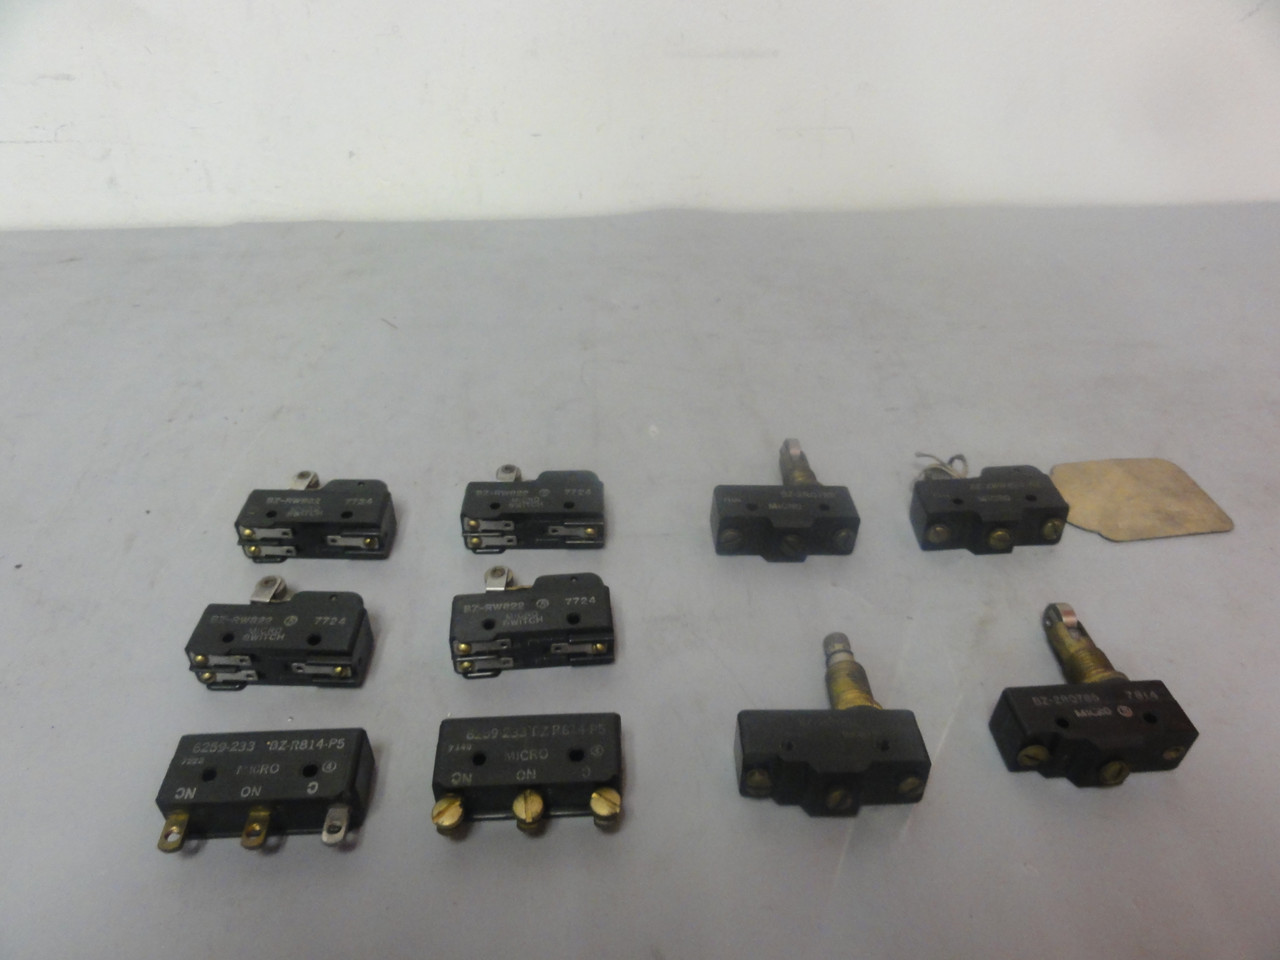 Honeywell Microswitch Limit Switches (Lot of 10) Multiple Varying Models